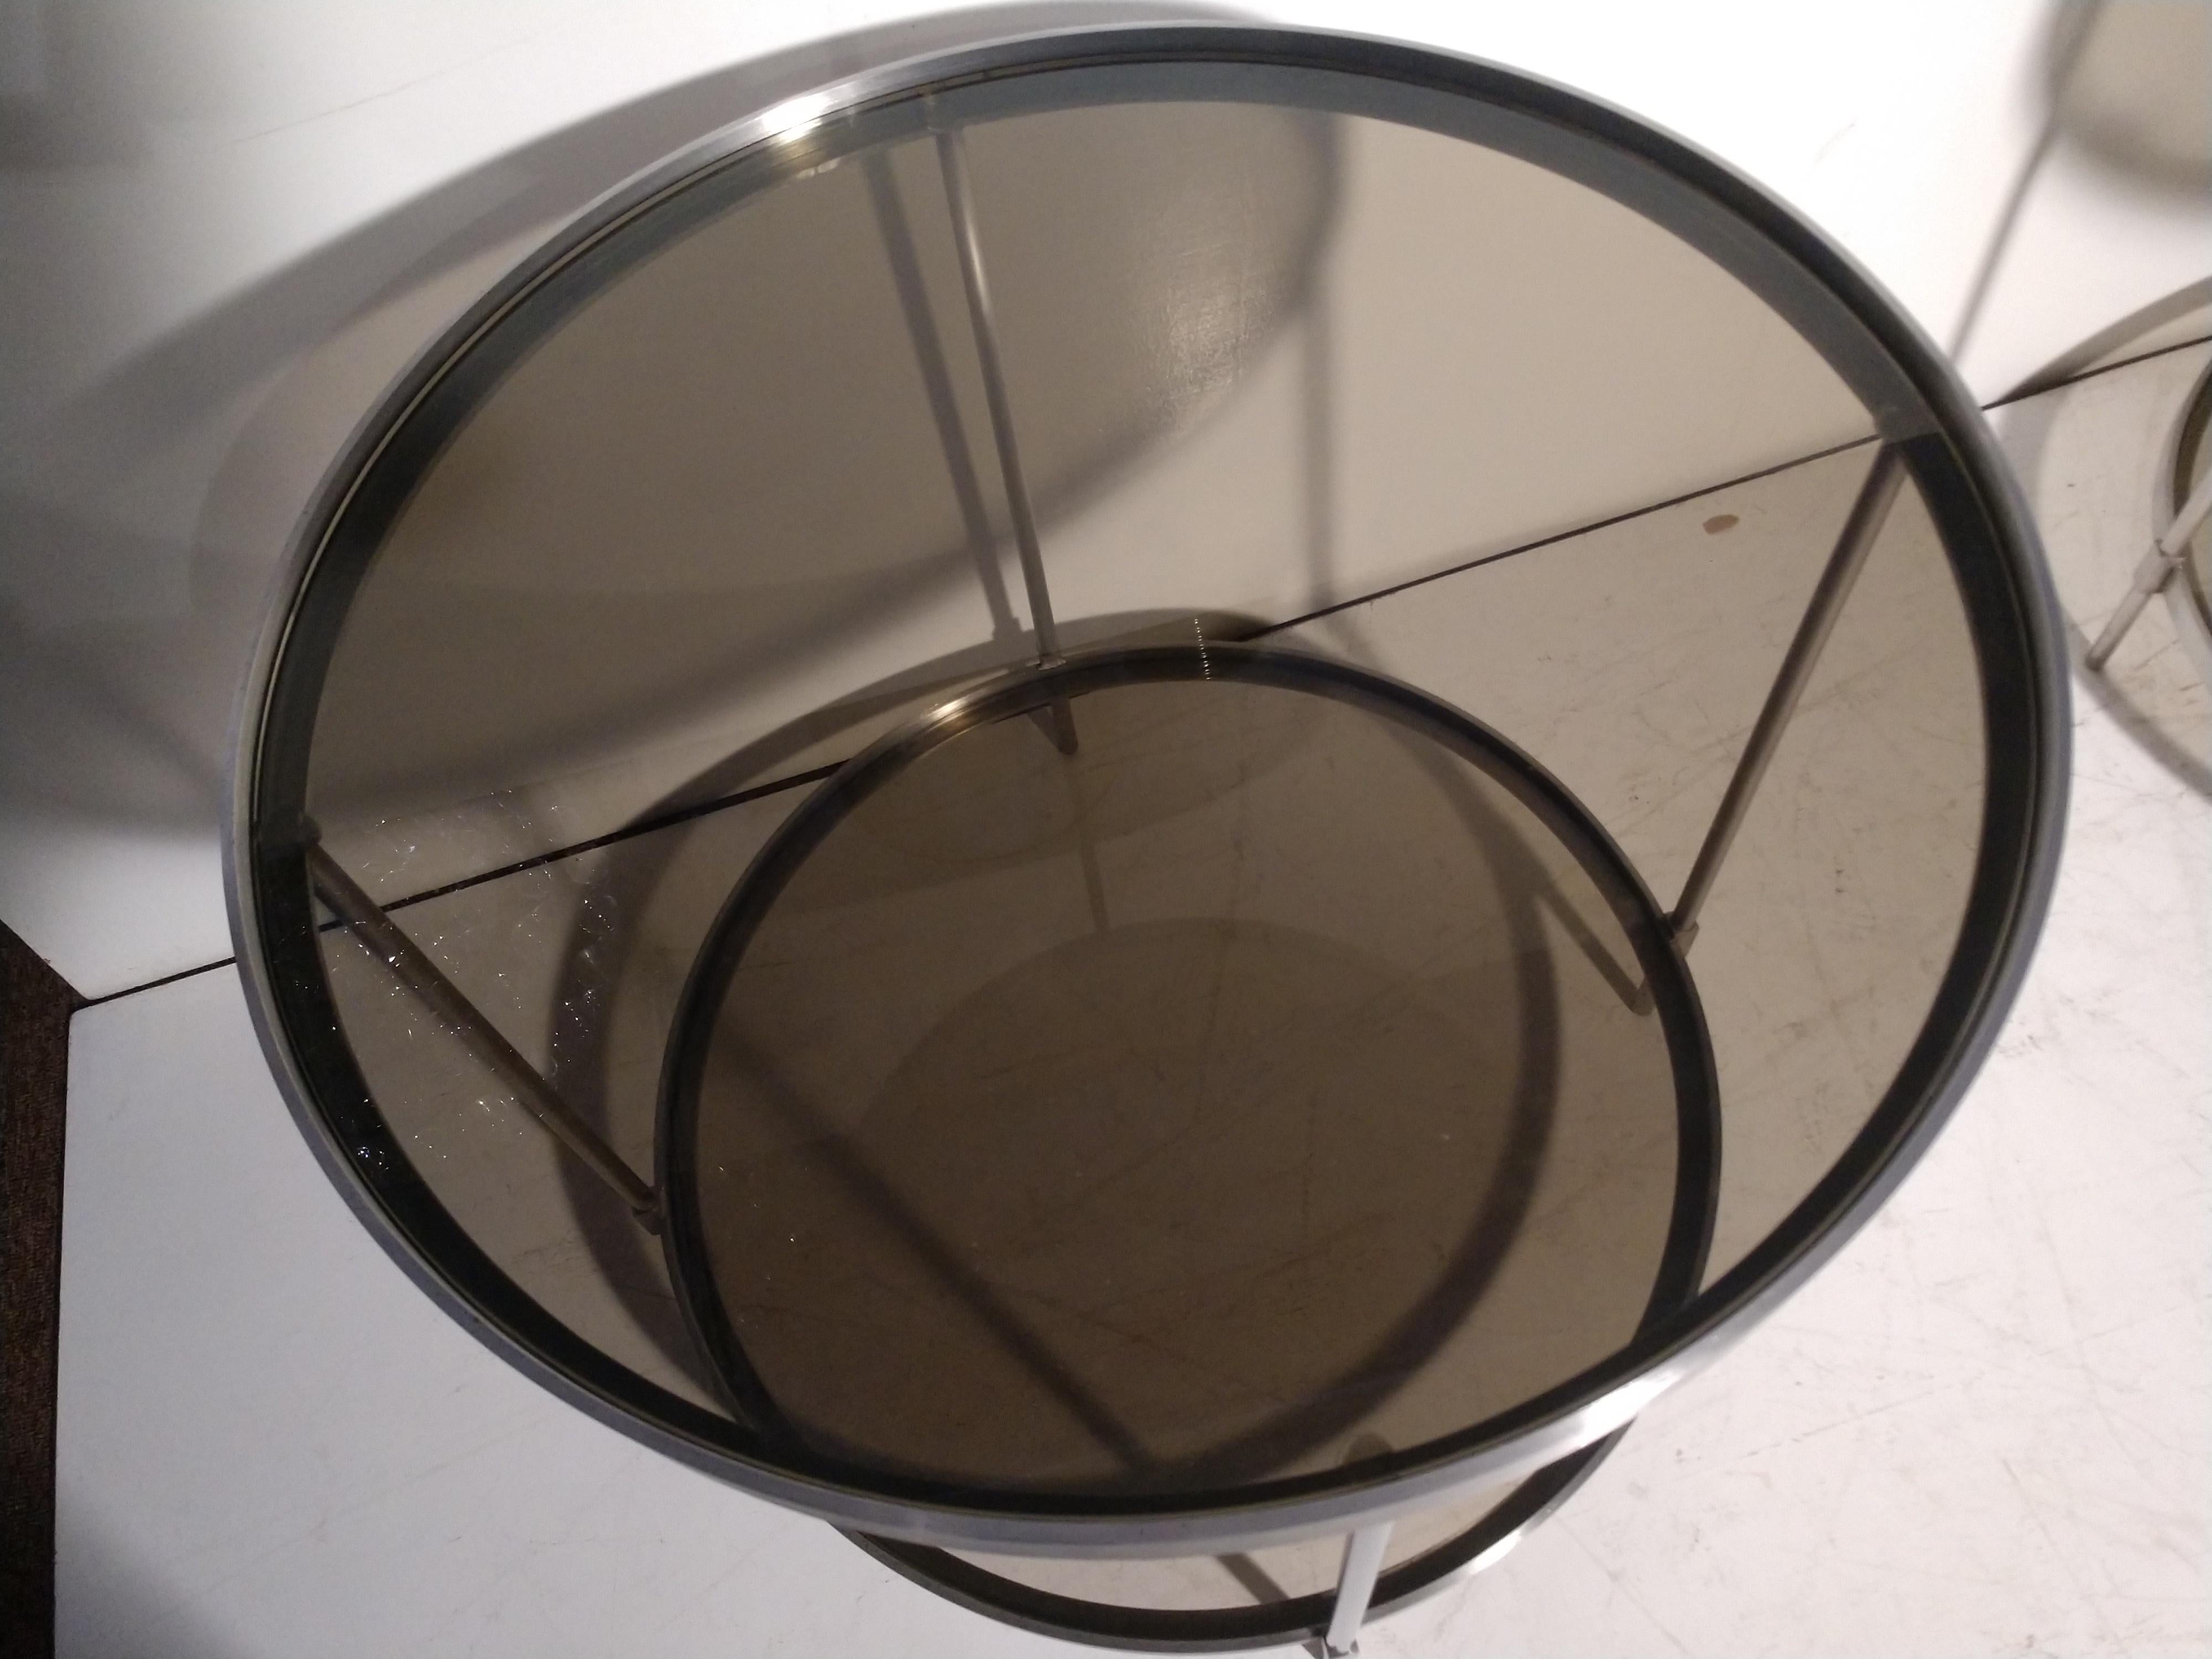 Pair of Mid Century Modern Stainless Steel Round End Tables with Smoked Glass In Good Condition For Sale In Port Jervis, NY